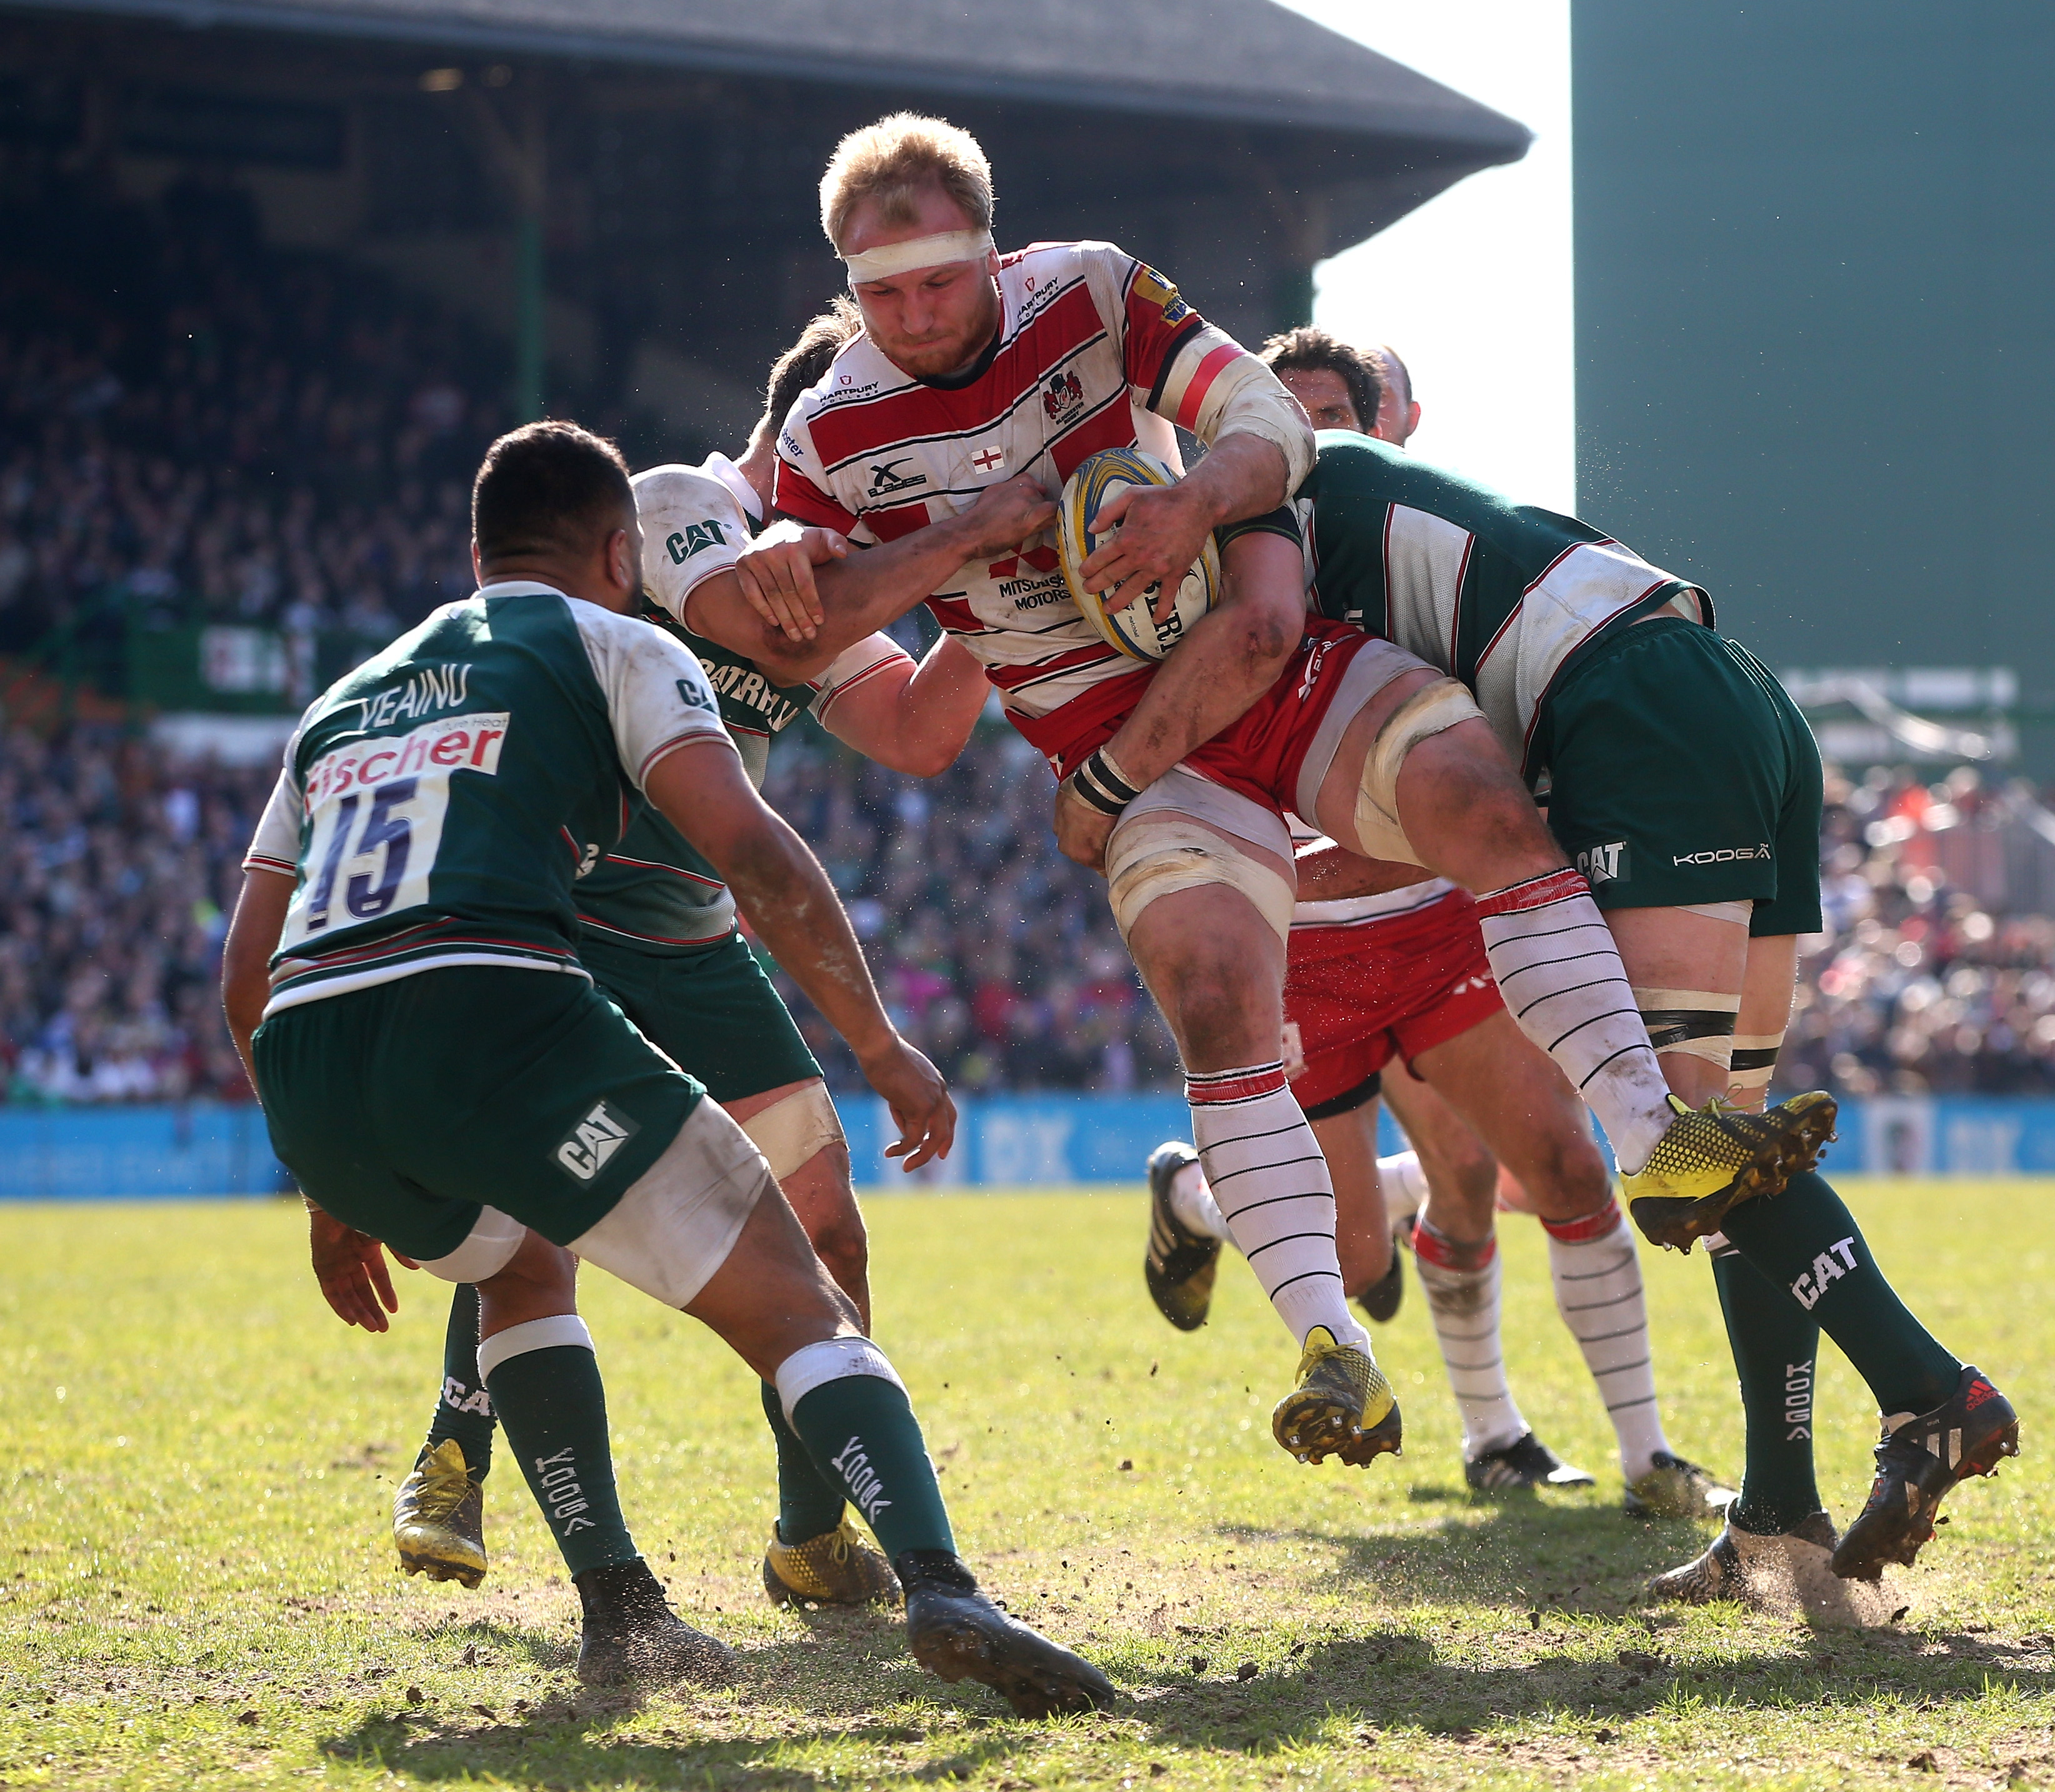 LEICESTER, ENGLAND - APRIL 02: Matt Kvesic of Gloucester is tackled during the Aviva Premiership match between Leicester Tigers and Gloucester at Welford Road on April 2, 2016 in Leicester, England. (Photo by David Rogers/Getty Images)